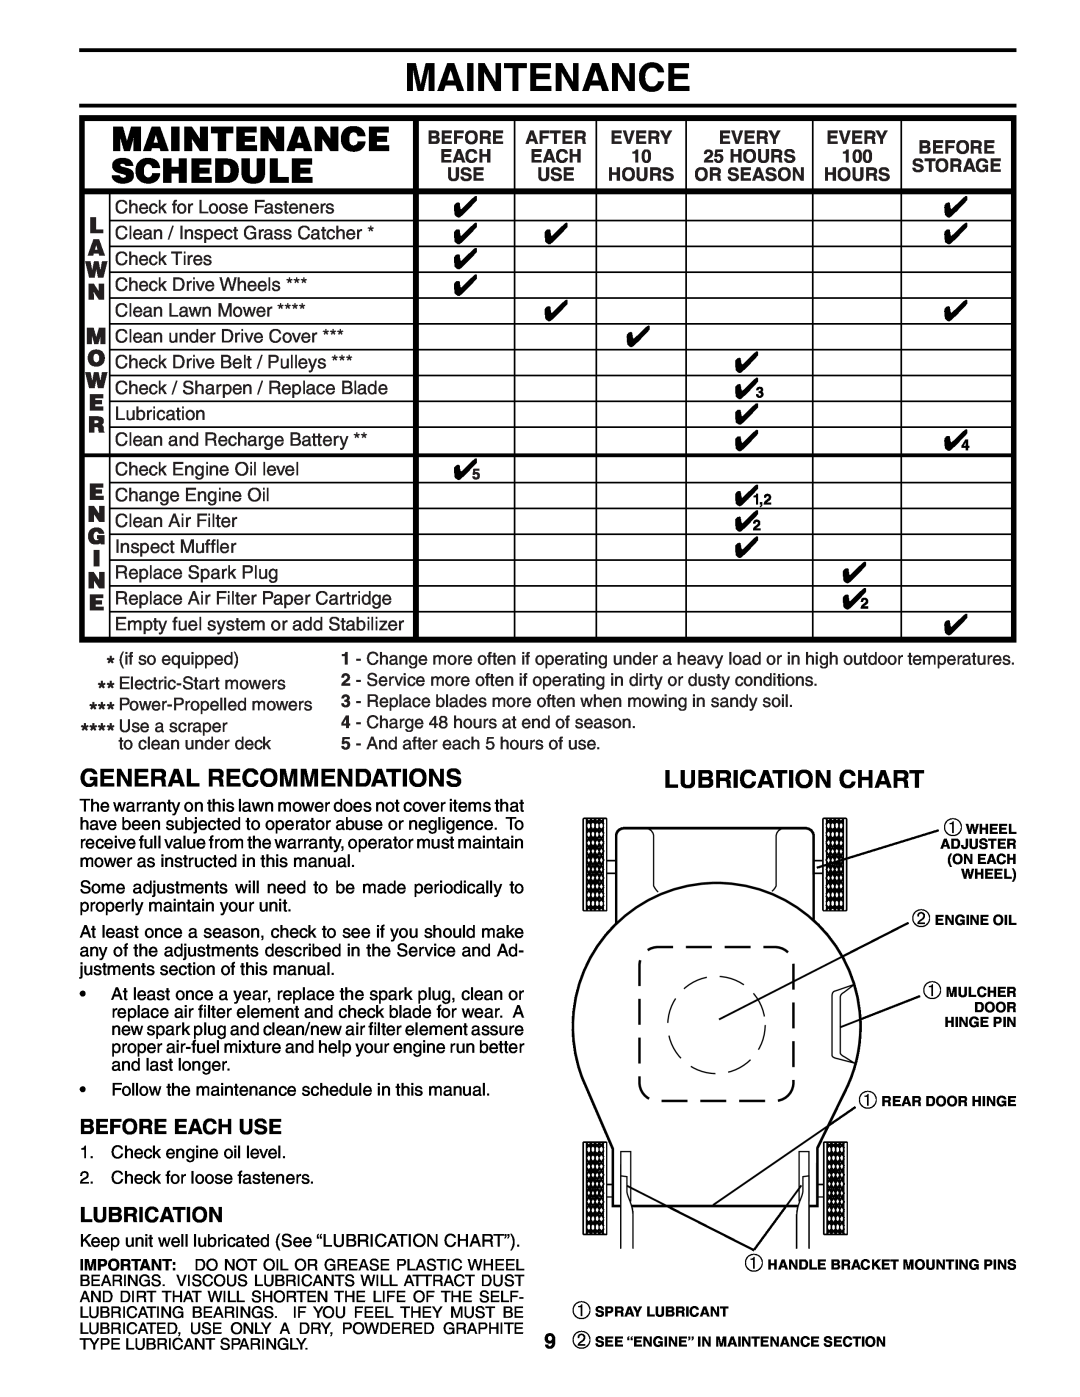 Husqvarna 7021CH1 Maintenance, General Recommendations, Lubrication Chart, Before Each Use, After, Every, Storage, Hours 